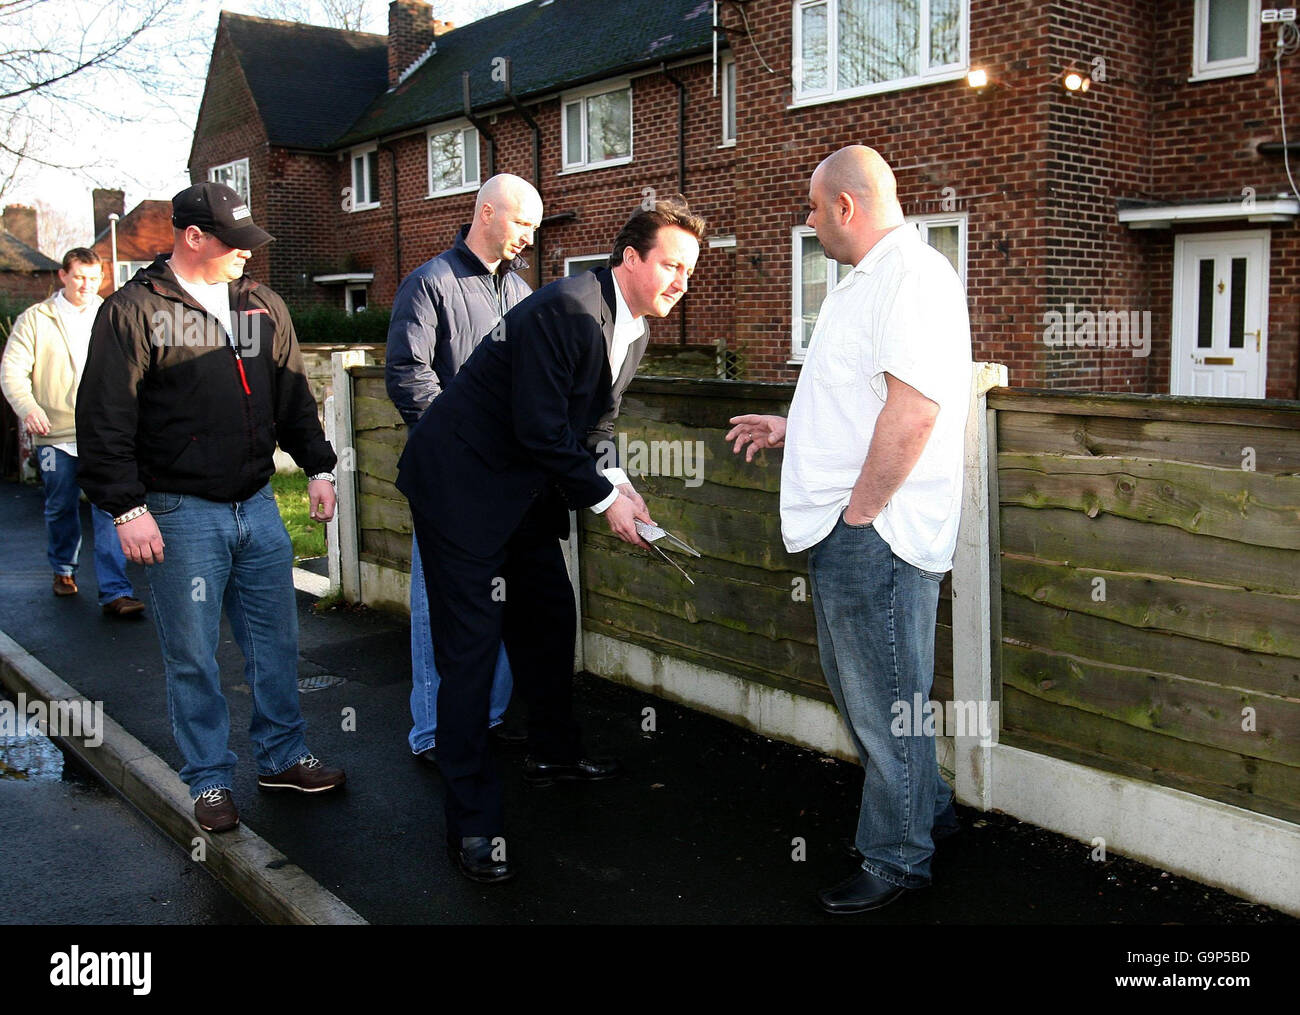 Leader of the Conservative Party David Cameron (centre) stops to pick up litter during his visit to the Benchill area of Wythenshawe, Manchester. Stock Photo